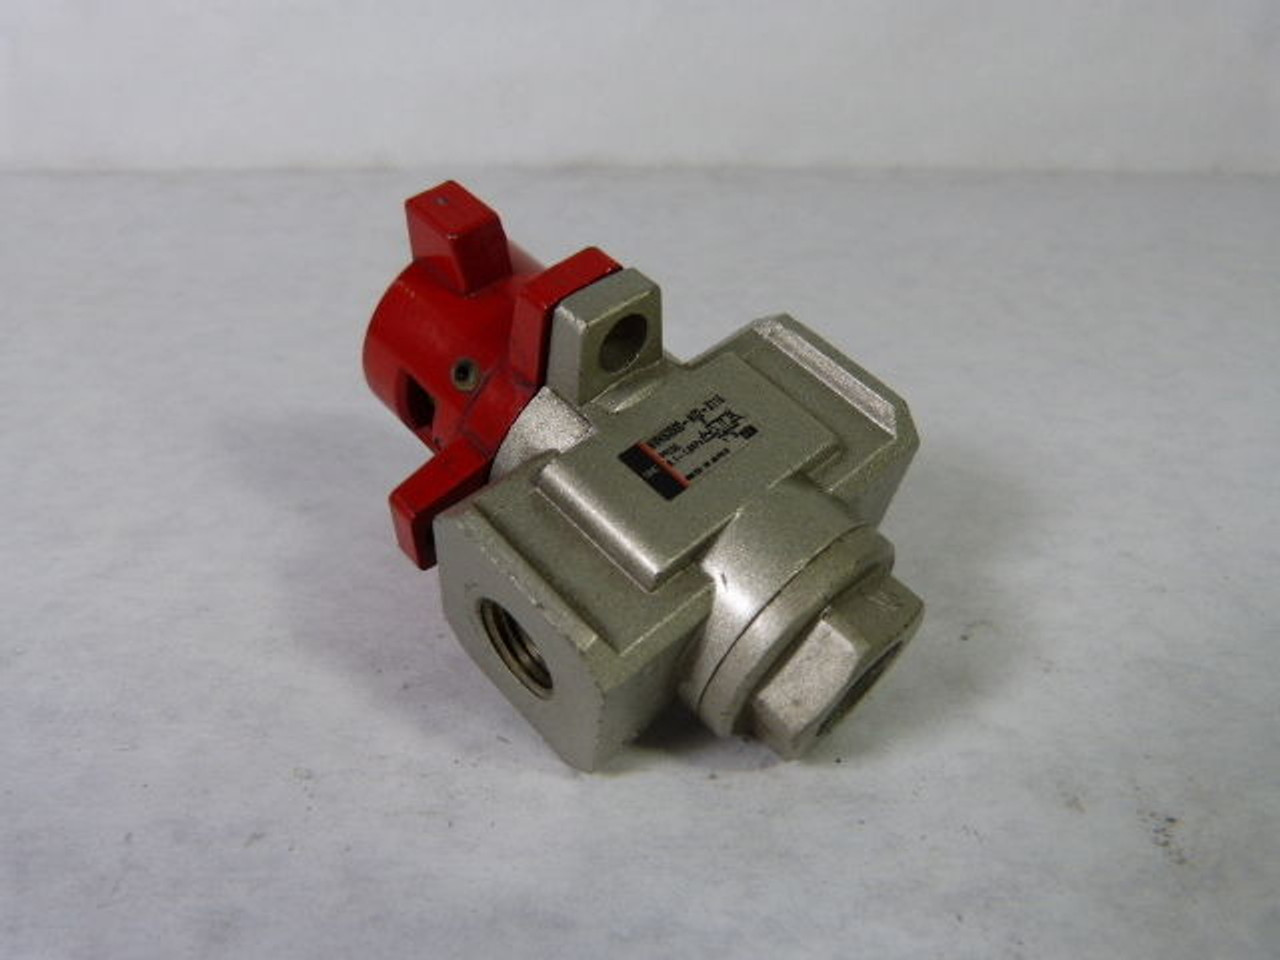 SMC NVHS3500-N02-X116 Pneumatic Valve Lock Out 1/2 USED